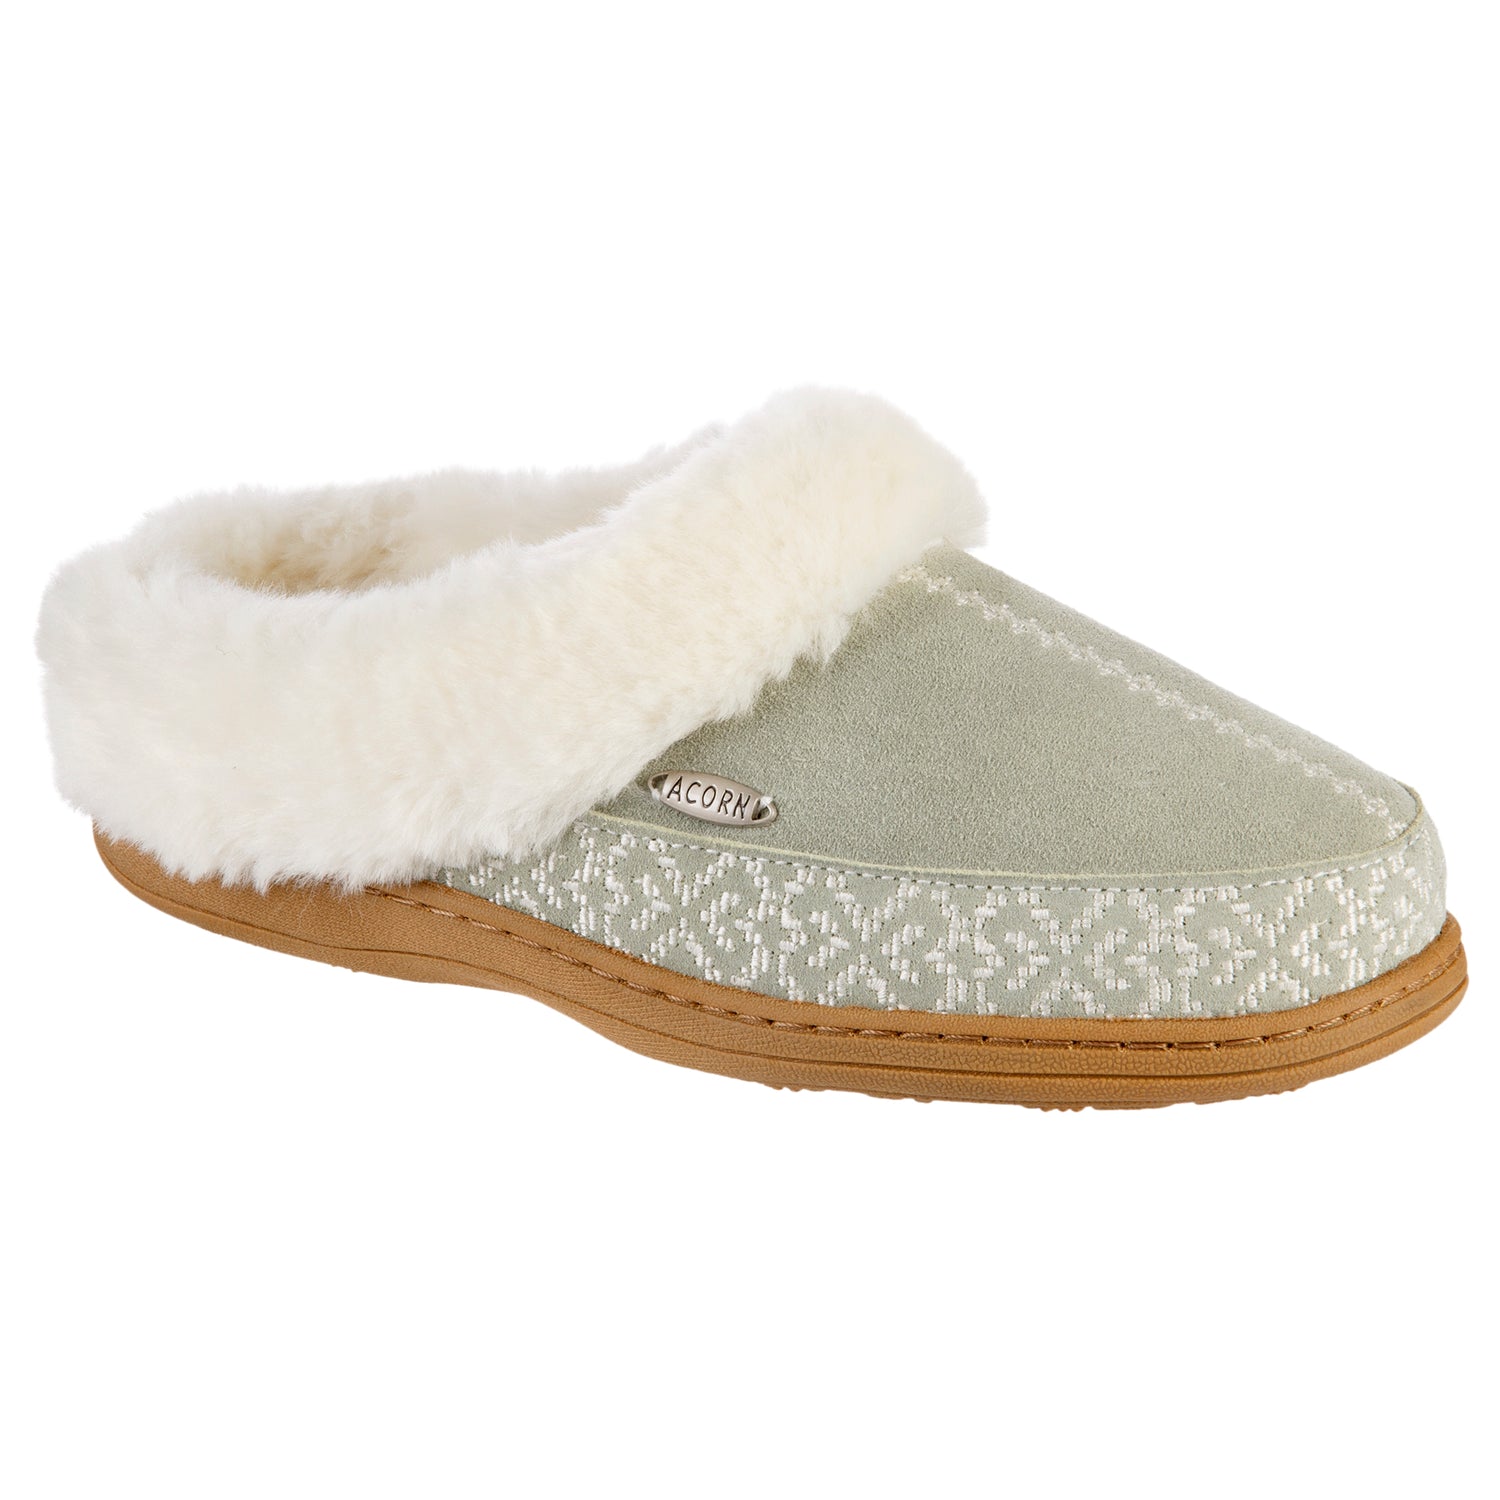 Cozy Lined Clog - Sage/Charcoal